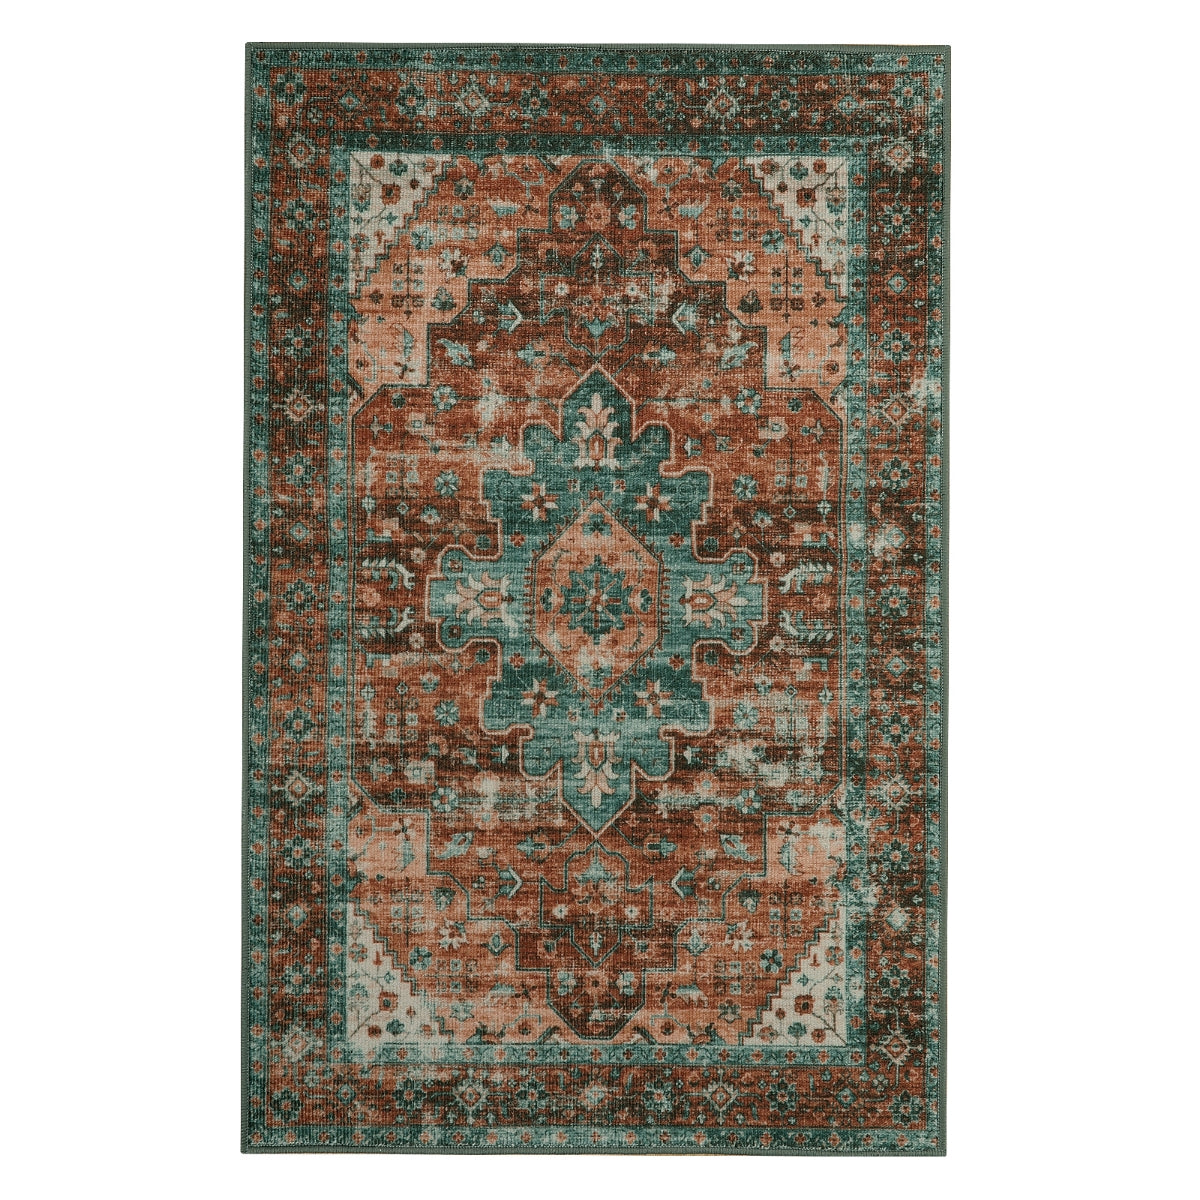 Small Boho Vintage Rug for Front Door Patio Entrance